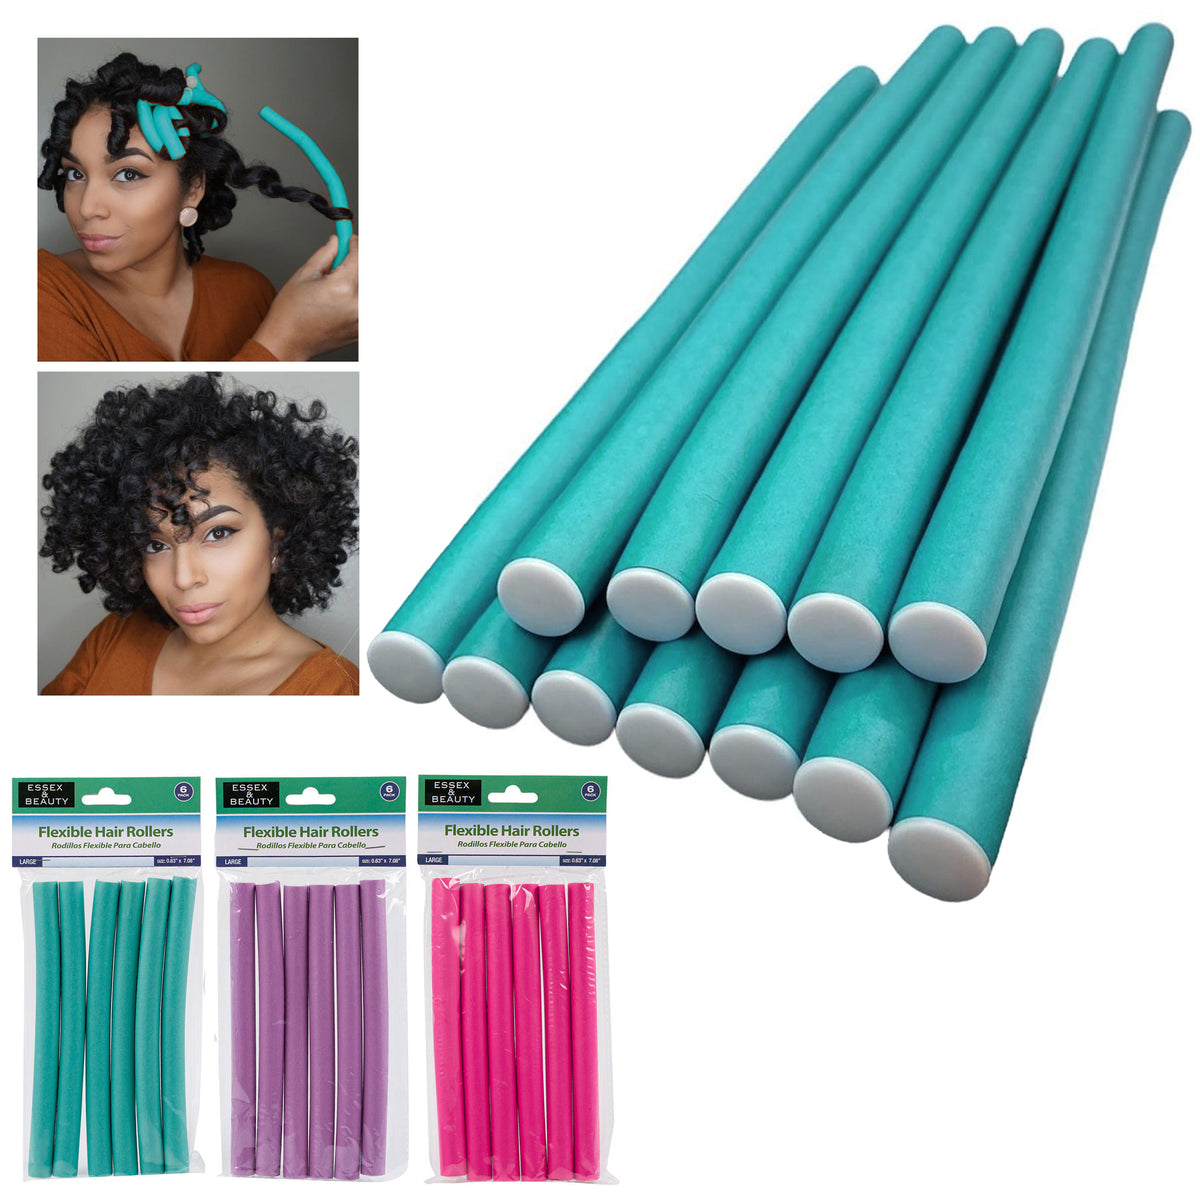 5 EXTRA LARGE 24 CM EXTRA LONG BENDY HAIRDRESSING HAIR ROLLERS FOAM HAIR  CURLERS  eBay